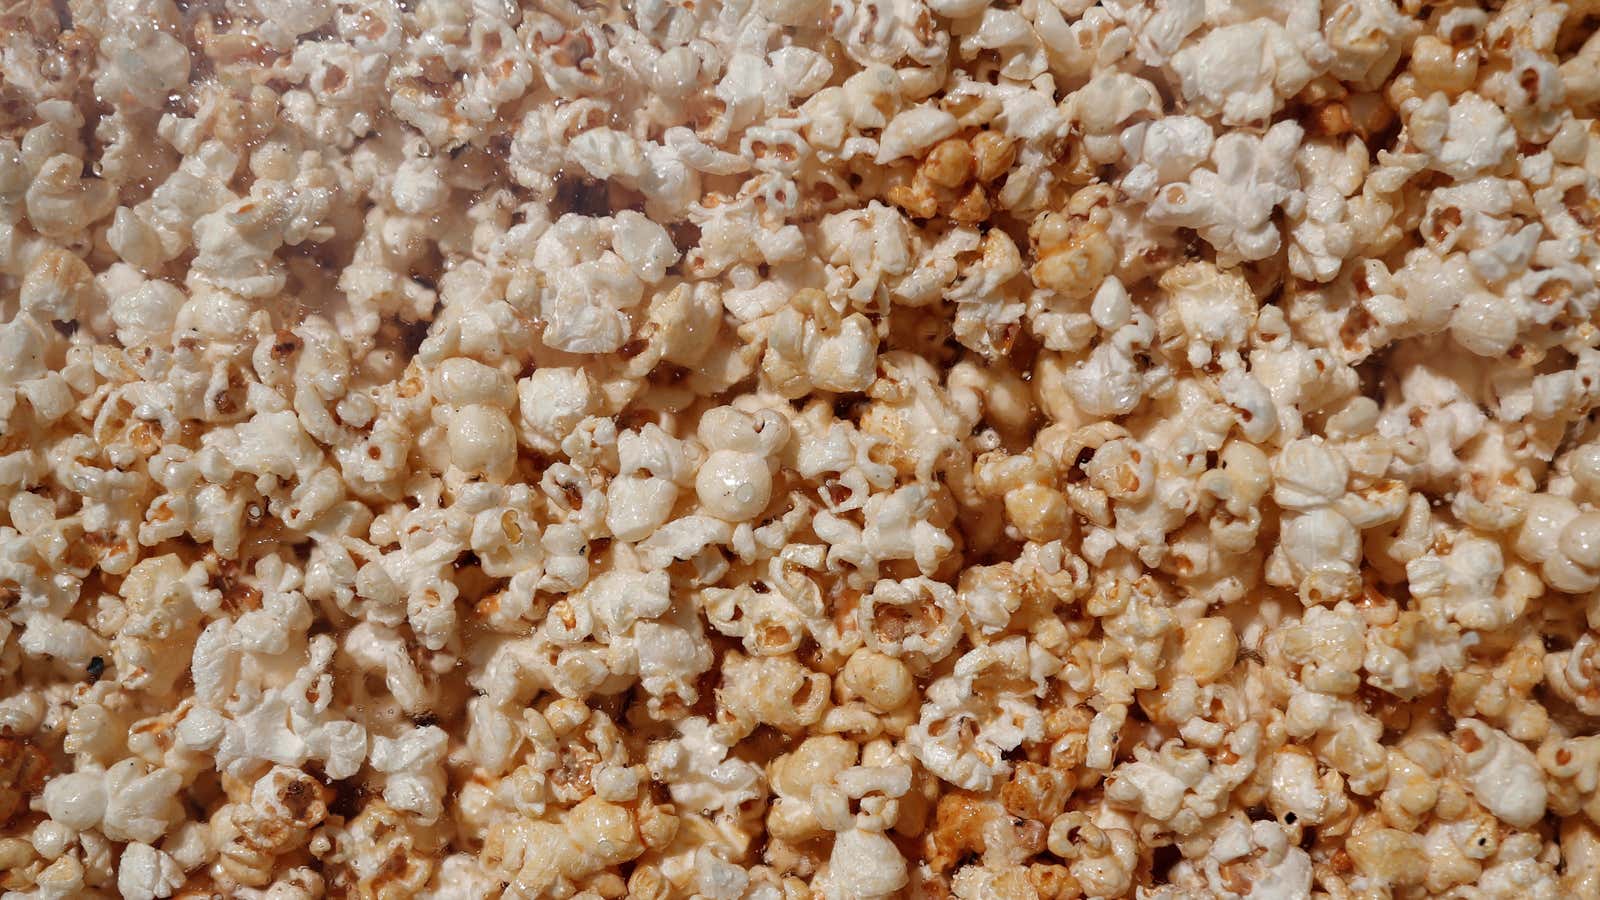 There’s more to popcorn than meets the eye.